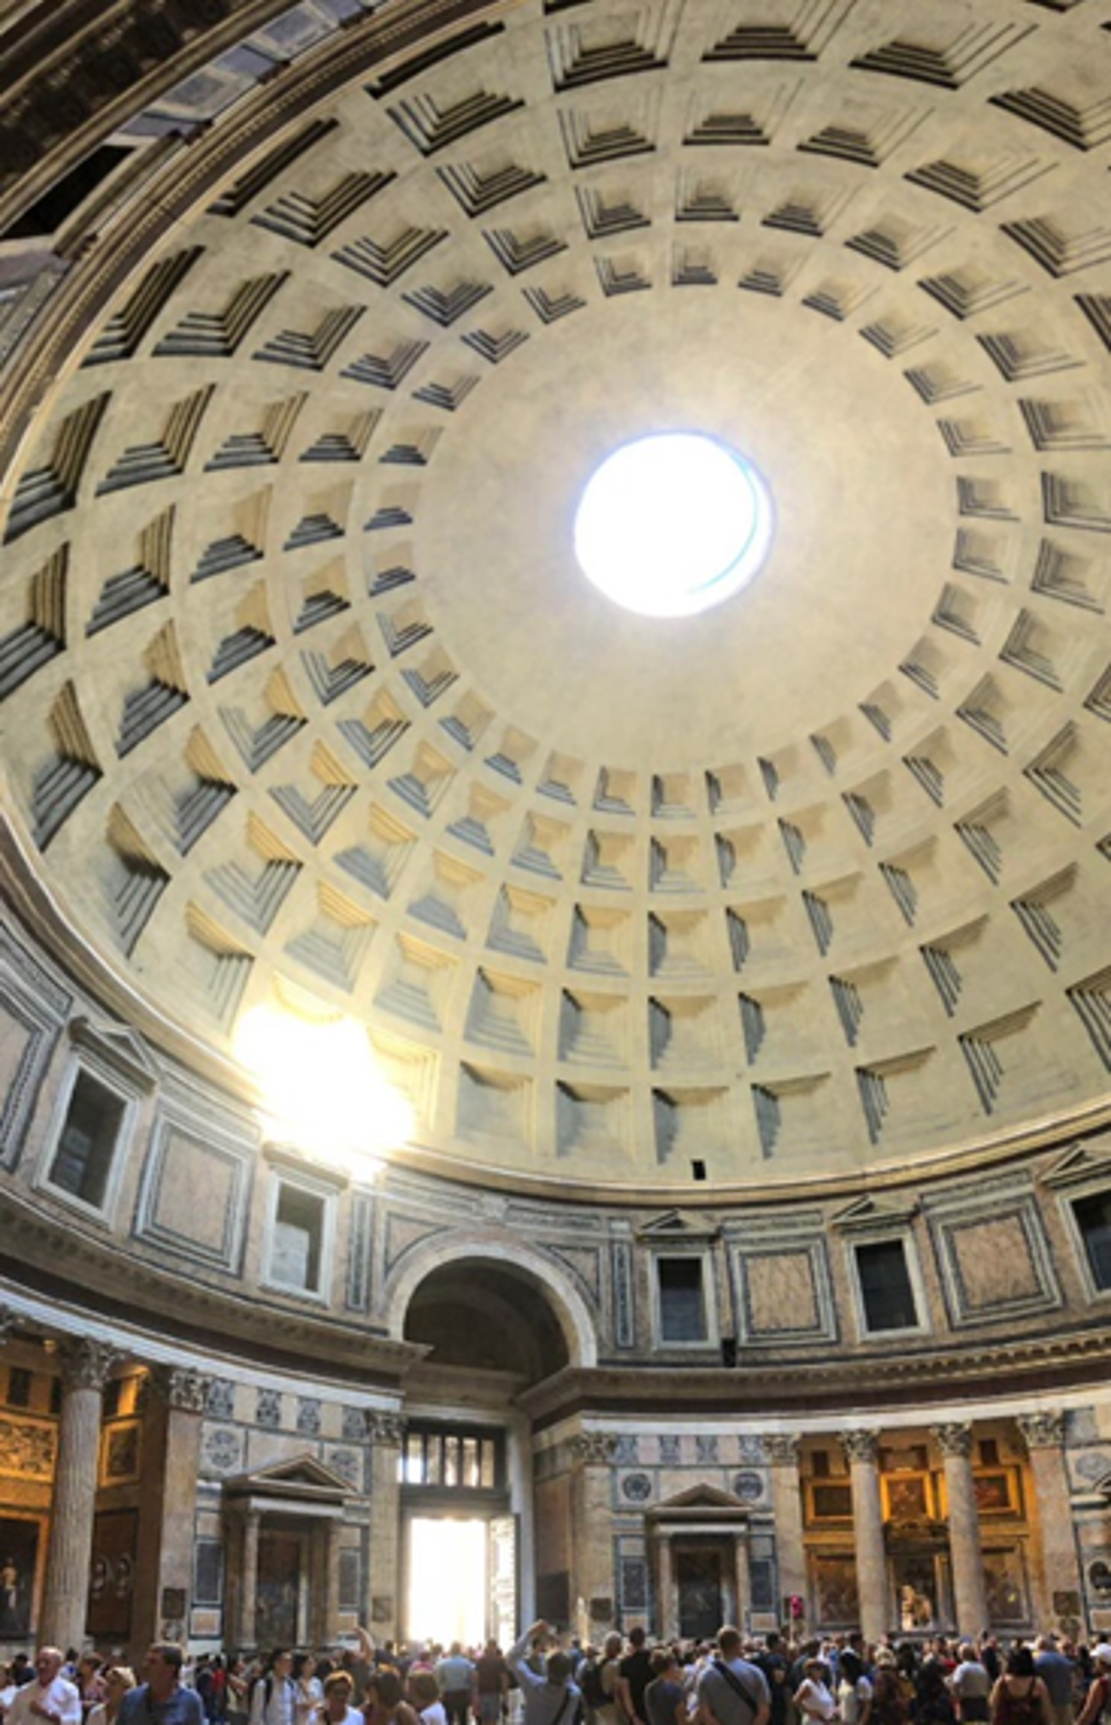 Concrete dome of the Pantheon in Rome.